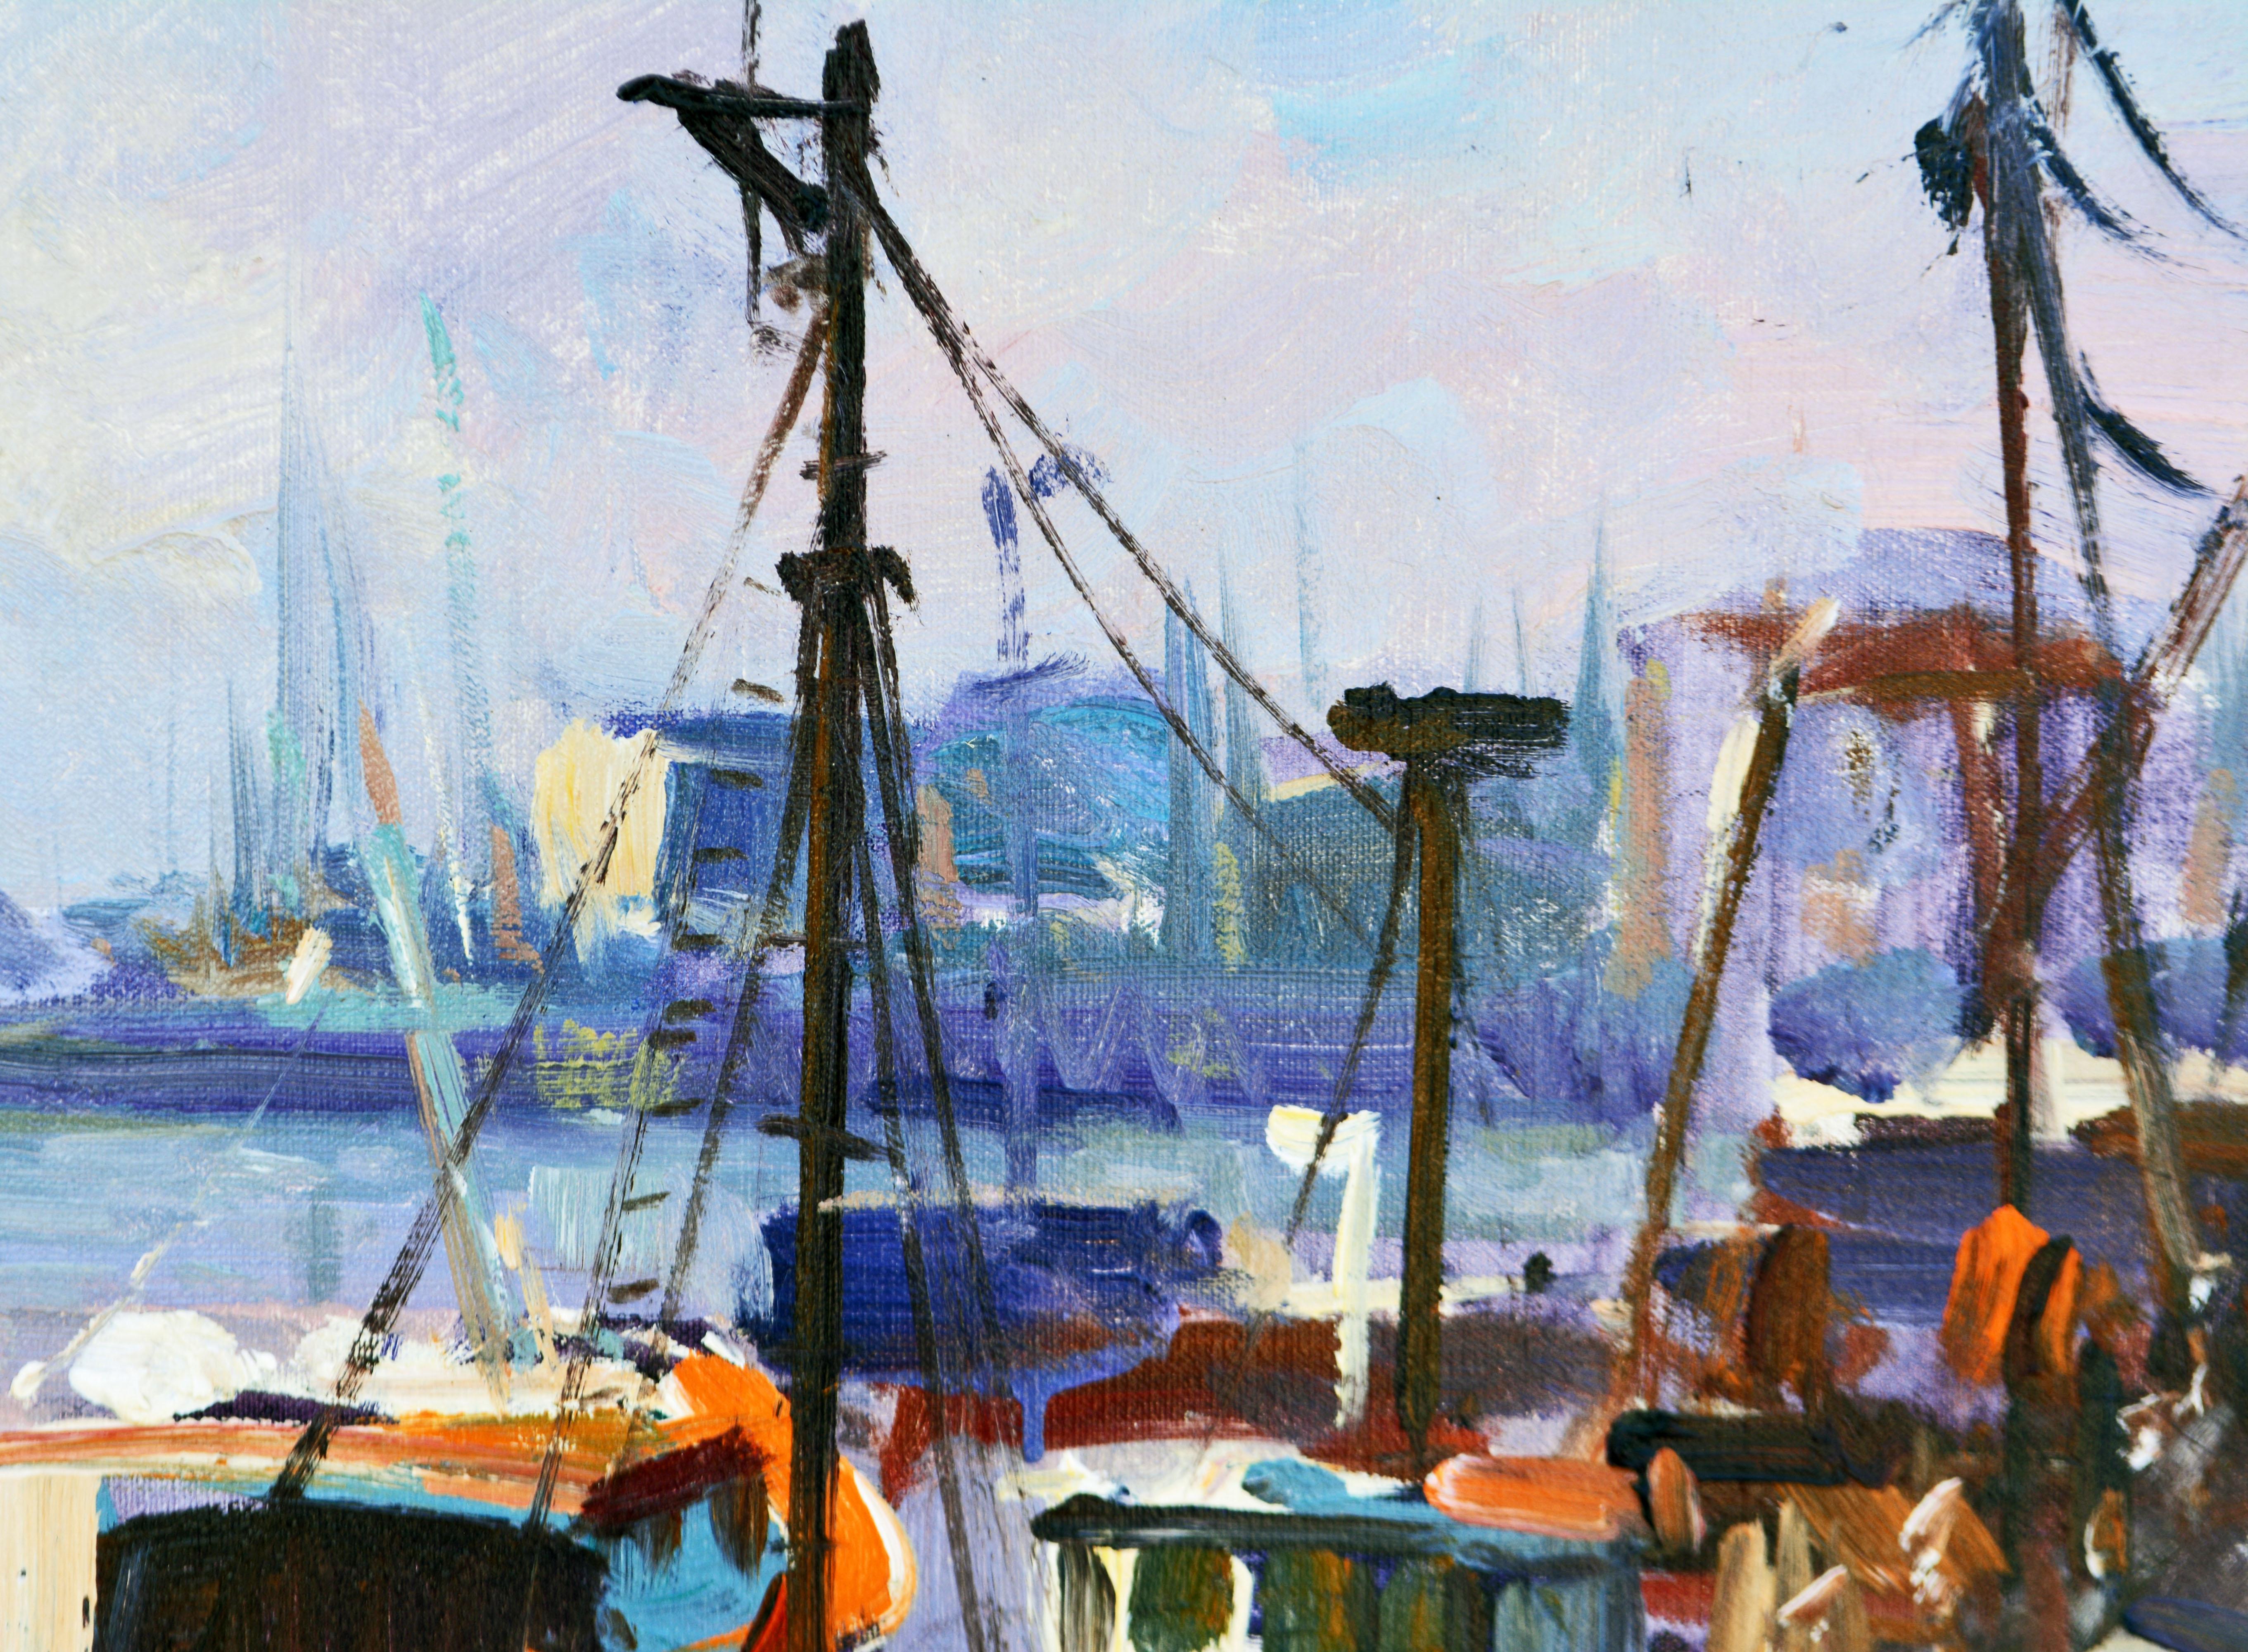 American 'Lobster Boats' Original Gloucester Impressionist Oil by Robert C. Gruppe